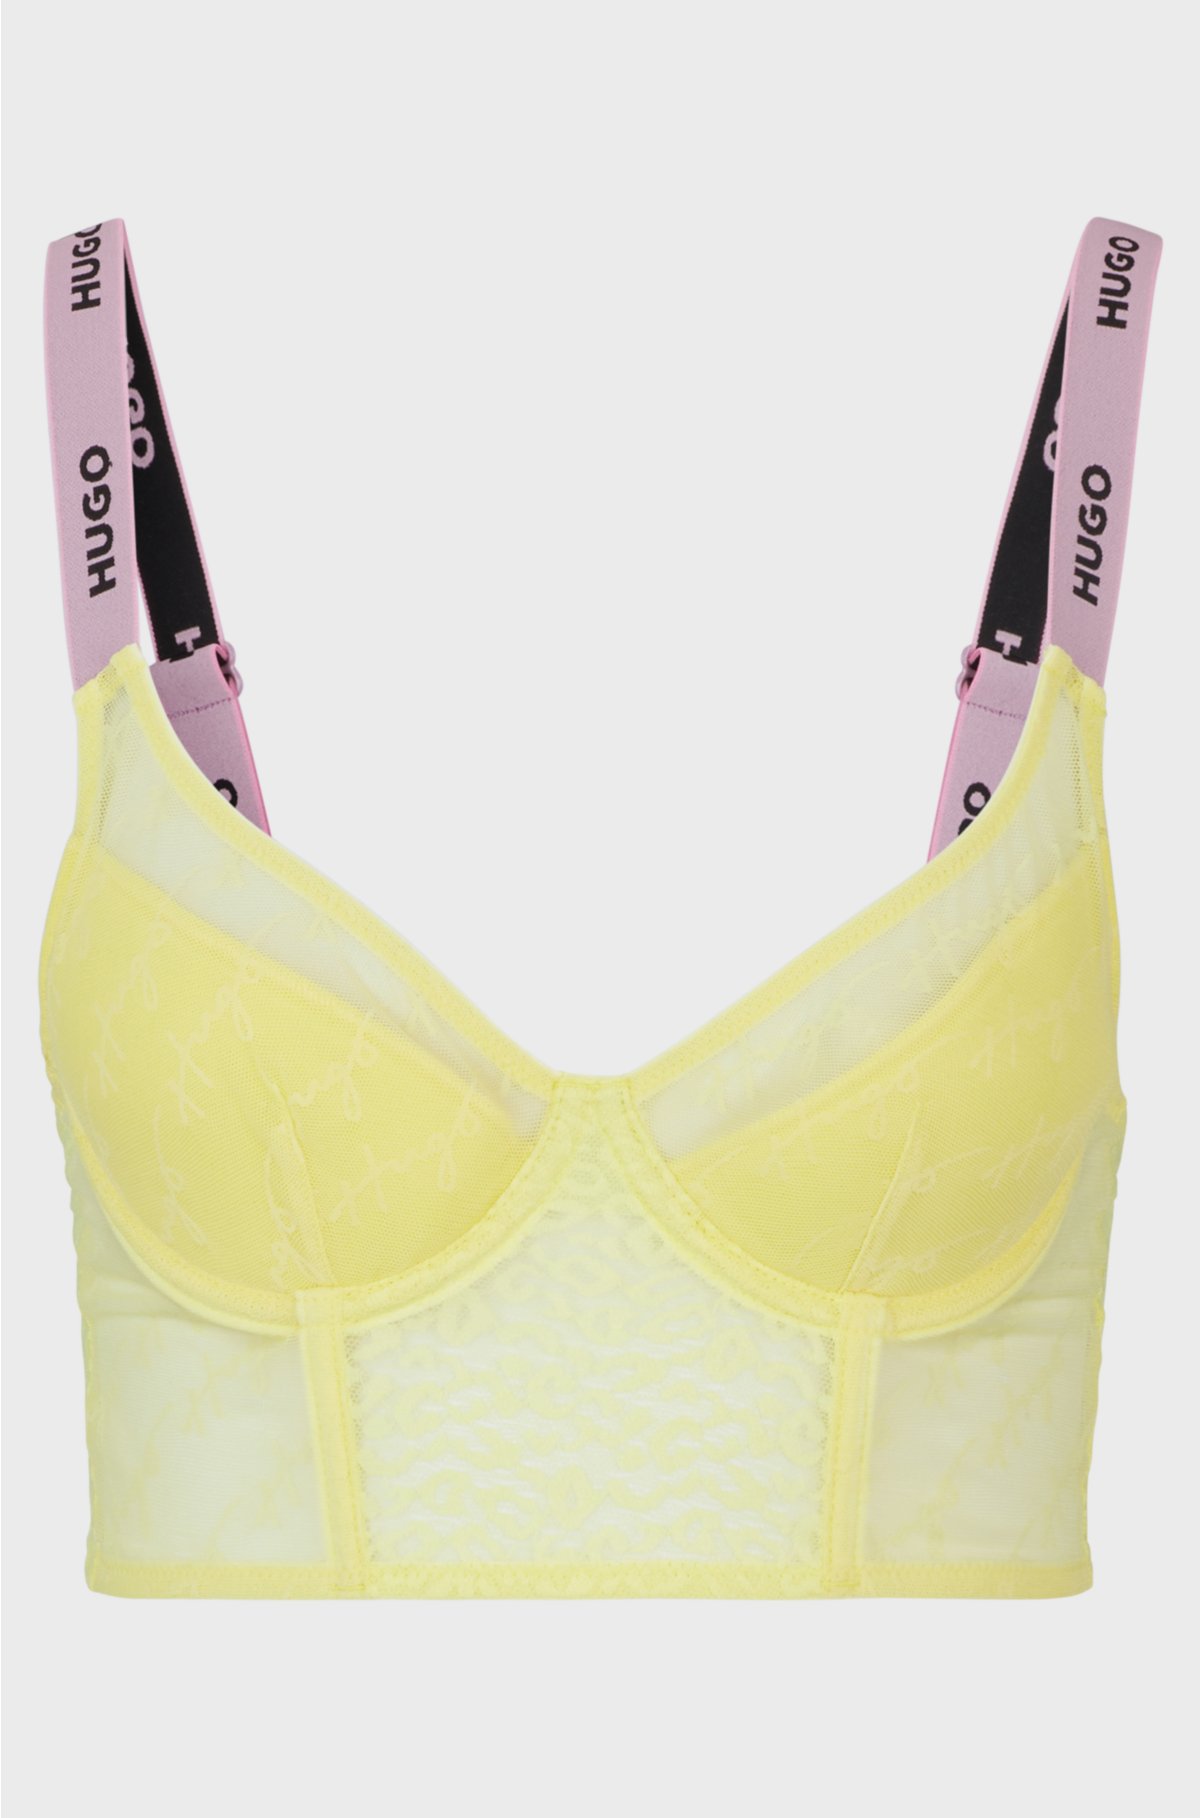 Lace bra with branded straps and hook and eye closure, Light Yellow